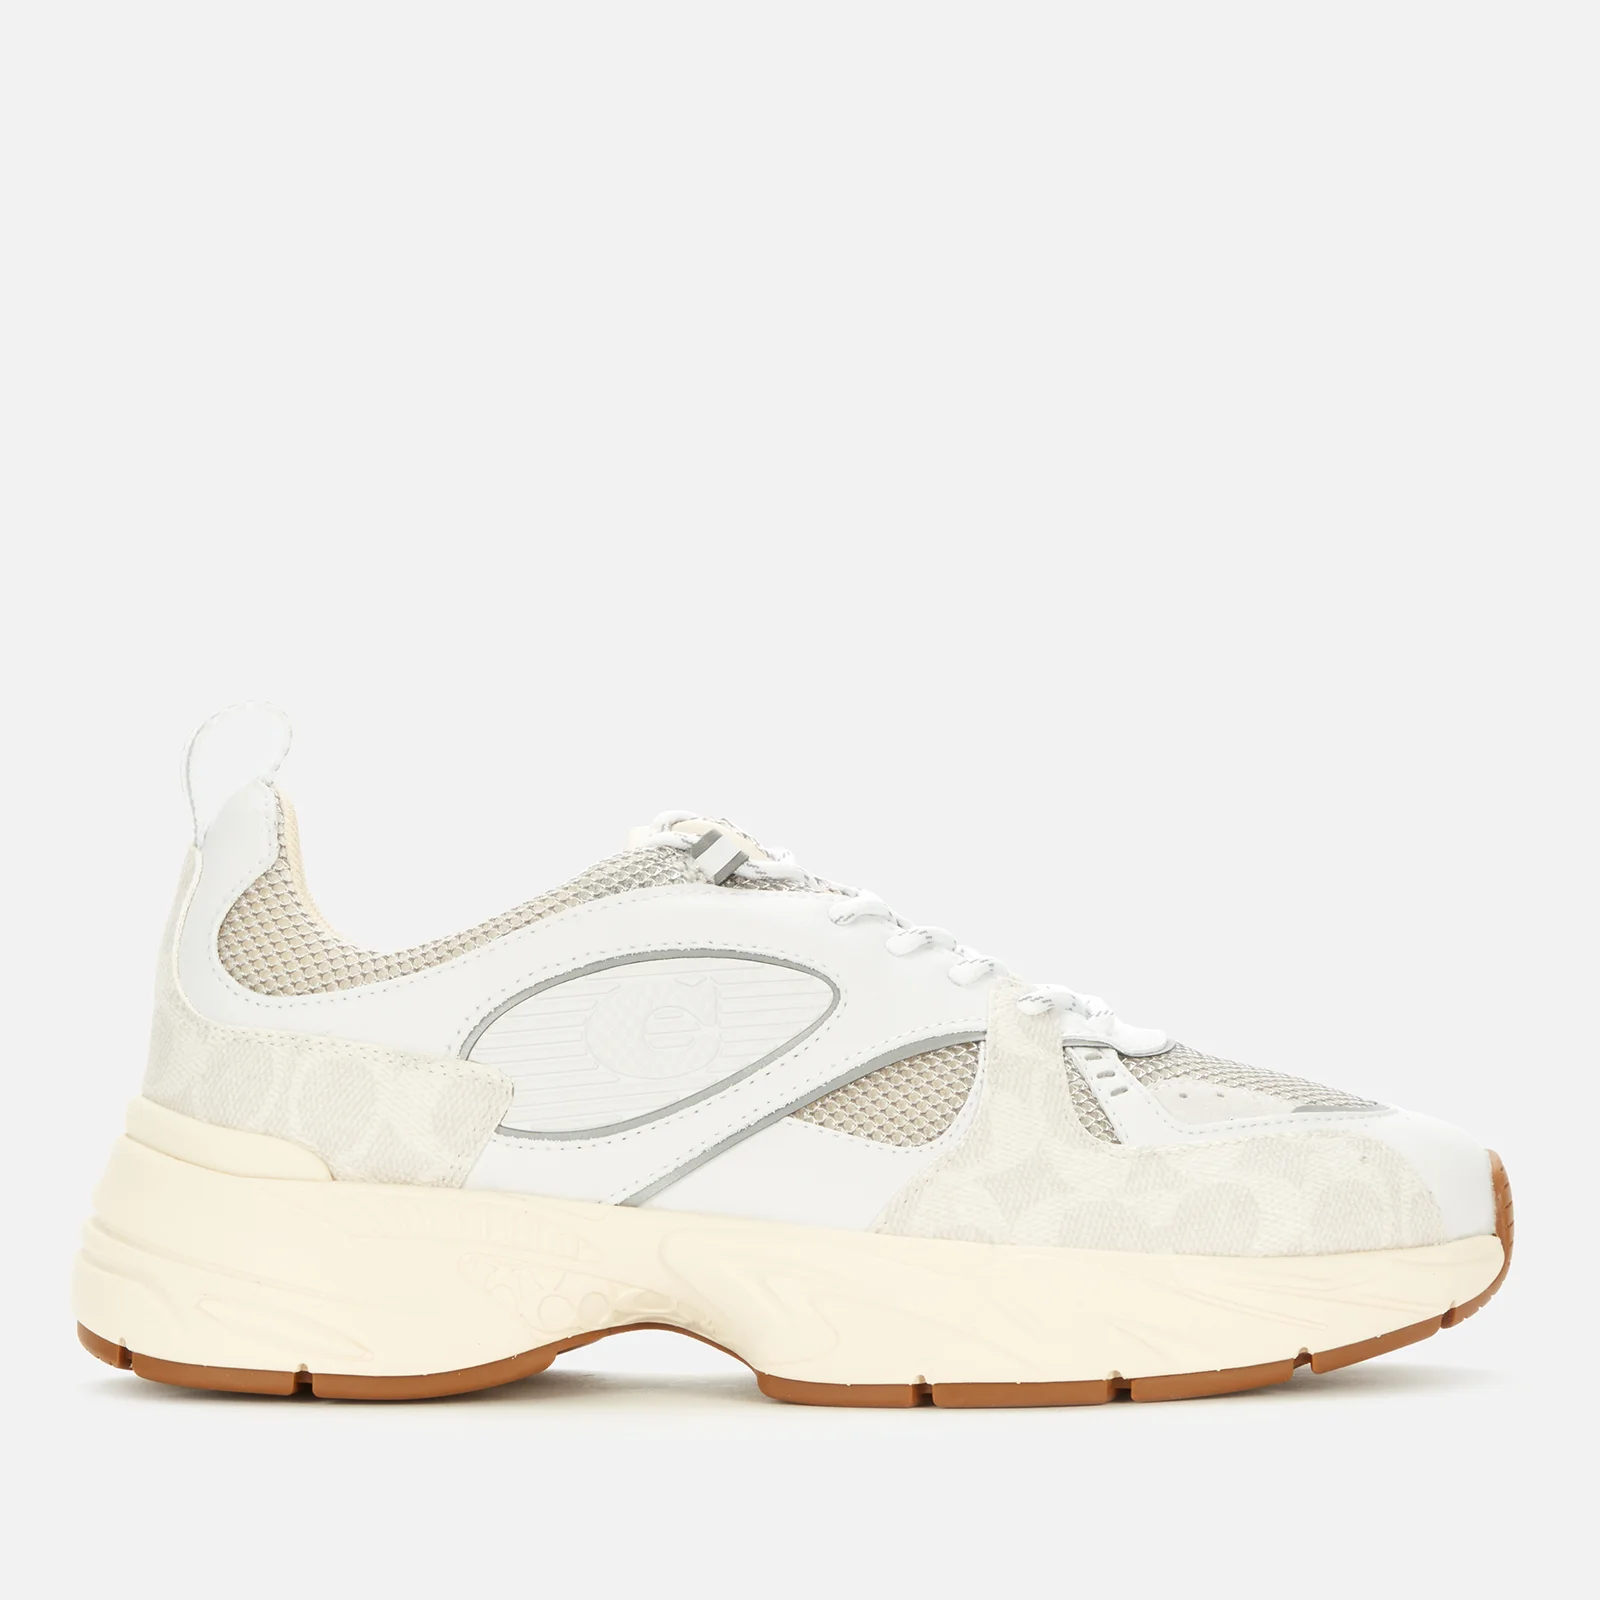 Coach Men's Tech Running Style Trainers - Optic White Image 1